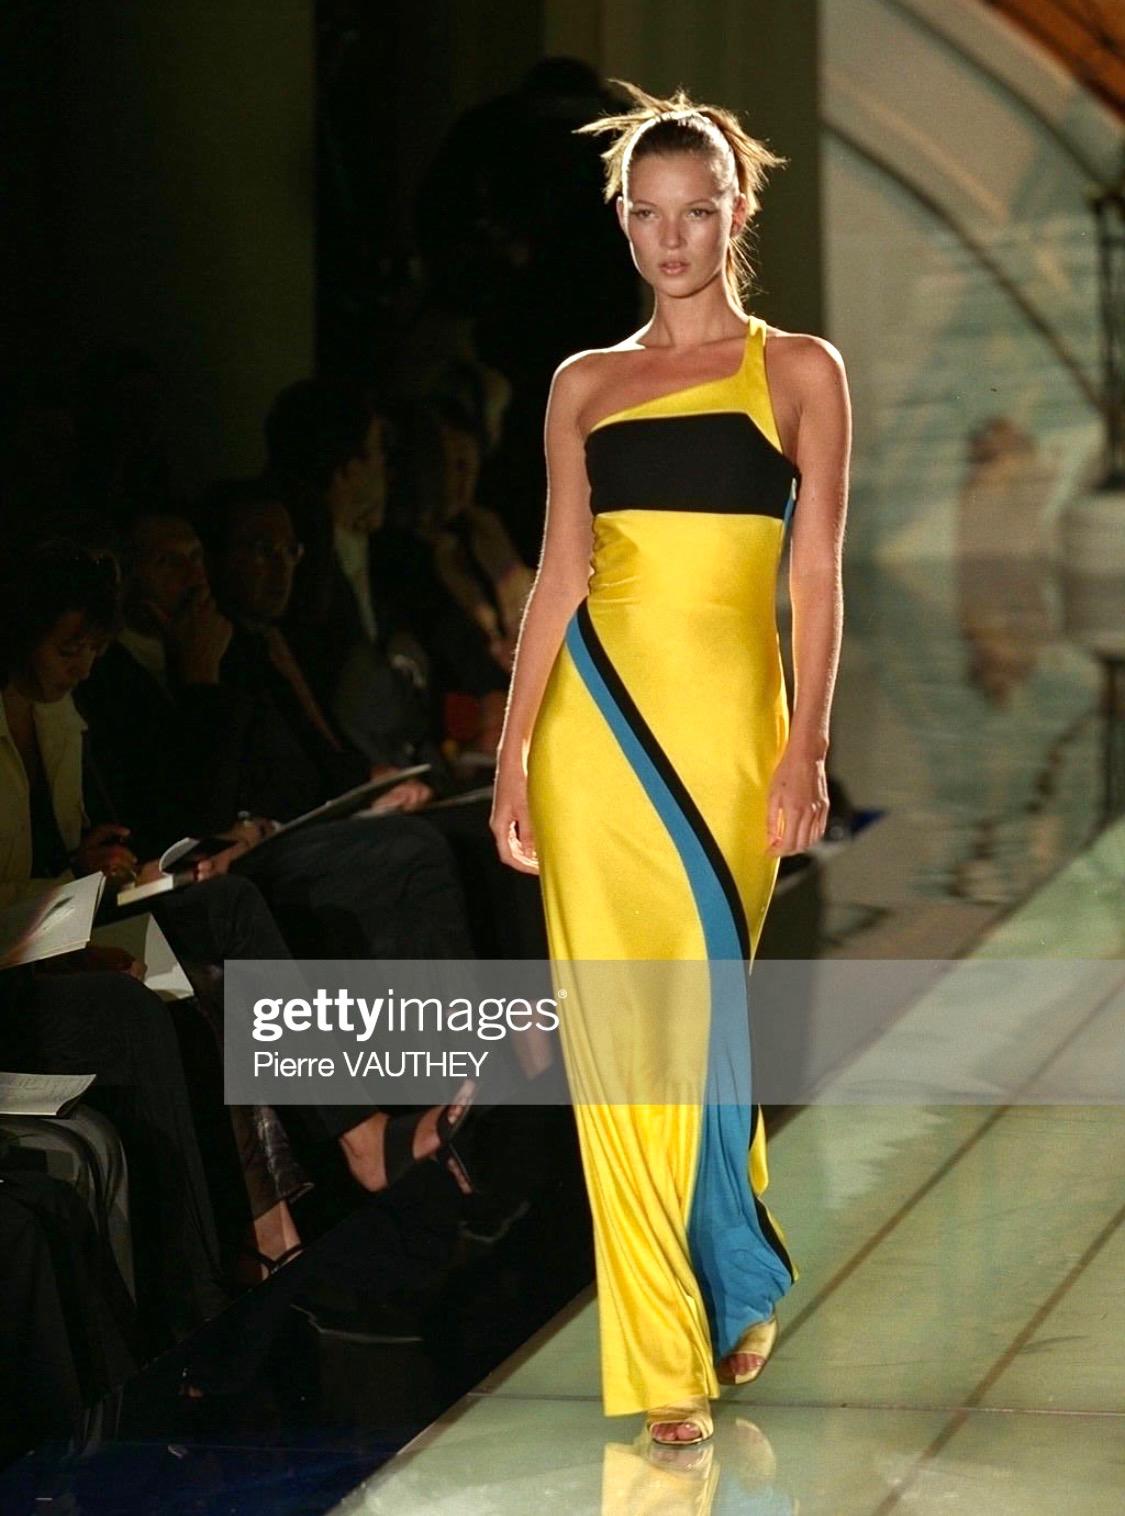 1997 Gianni Versace Knit Black Dress with Blue and Yellow Stripe  In Excellent Condition For Sale In West Hollywood, CA